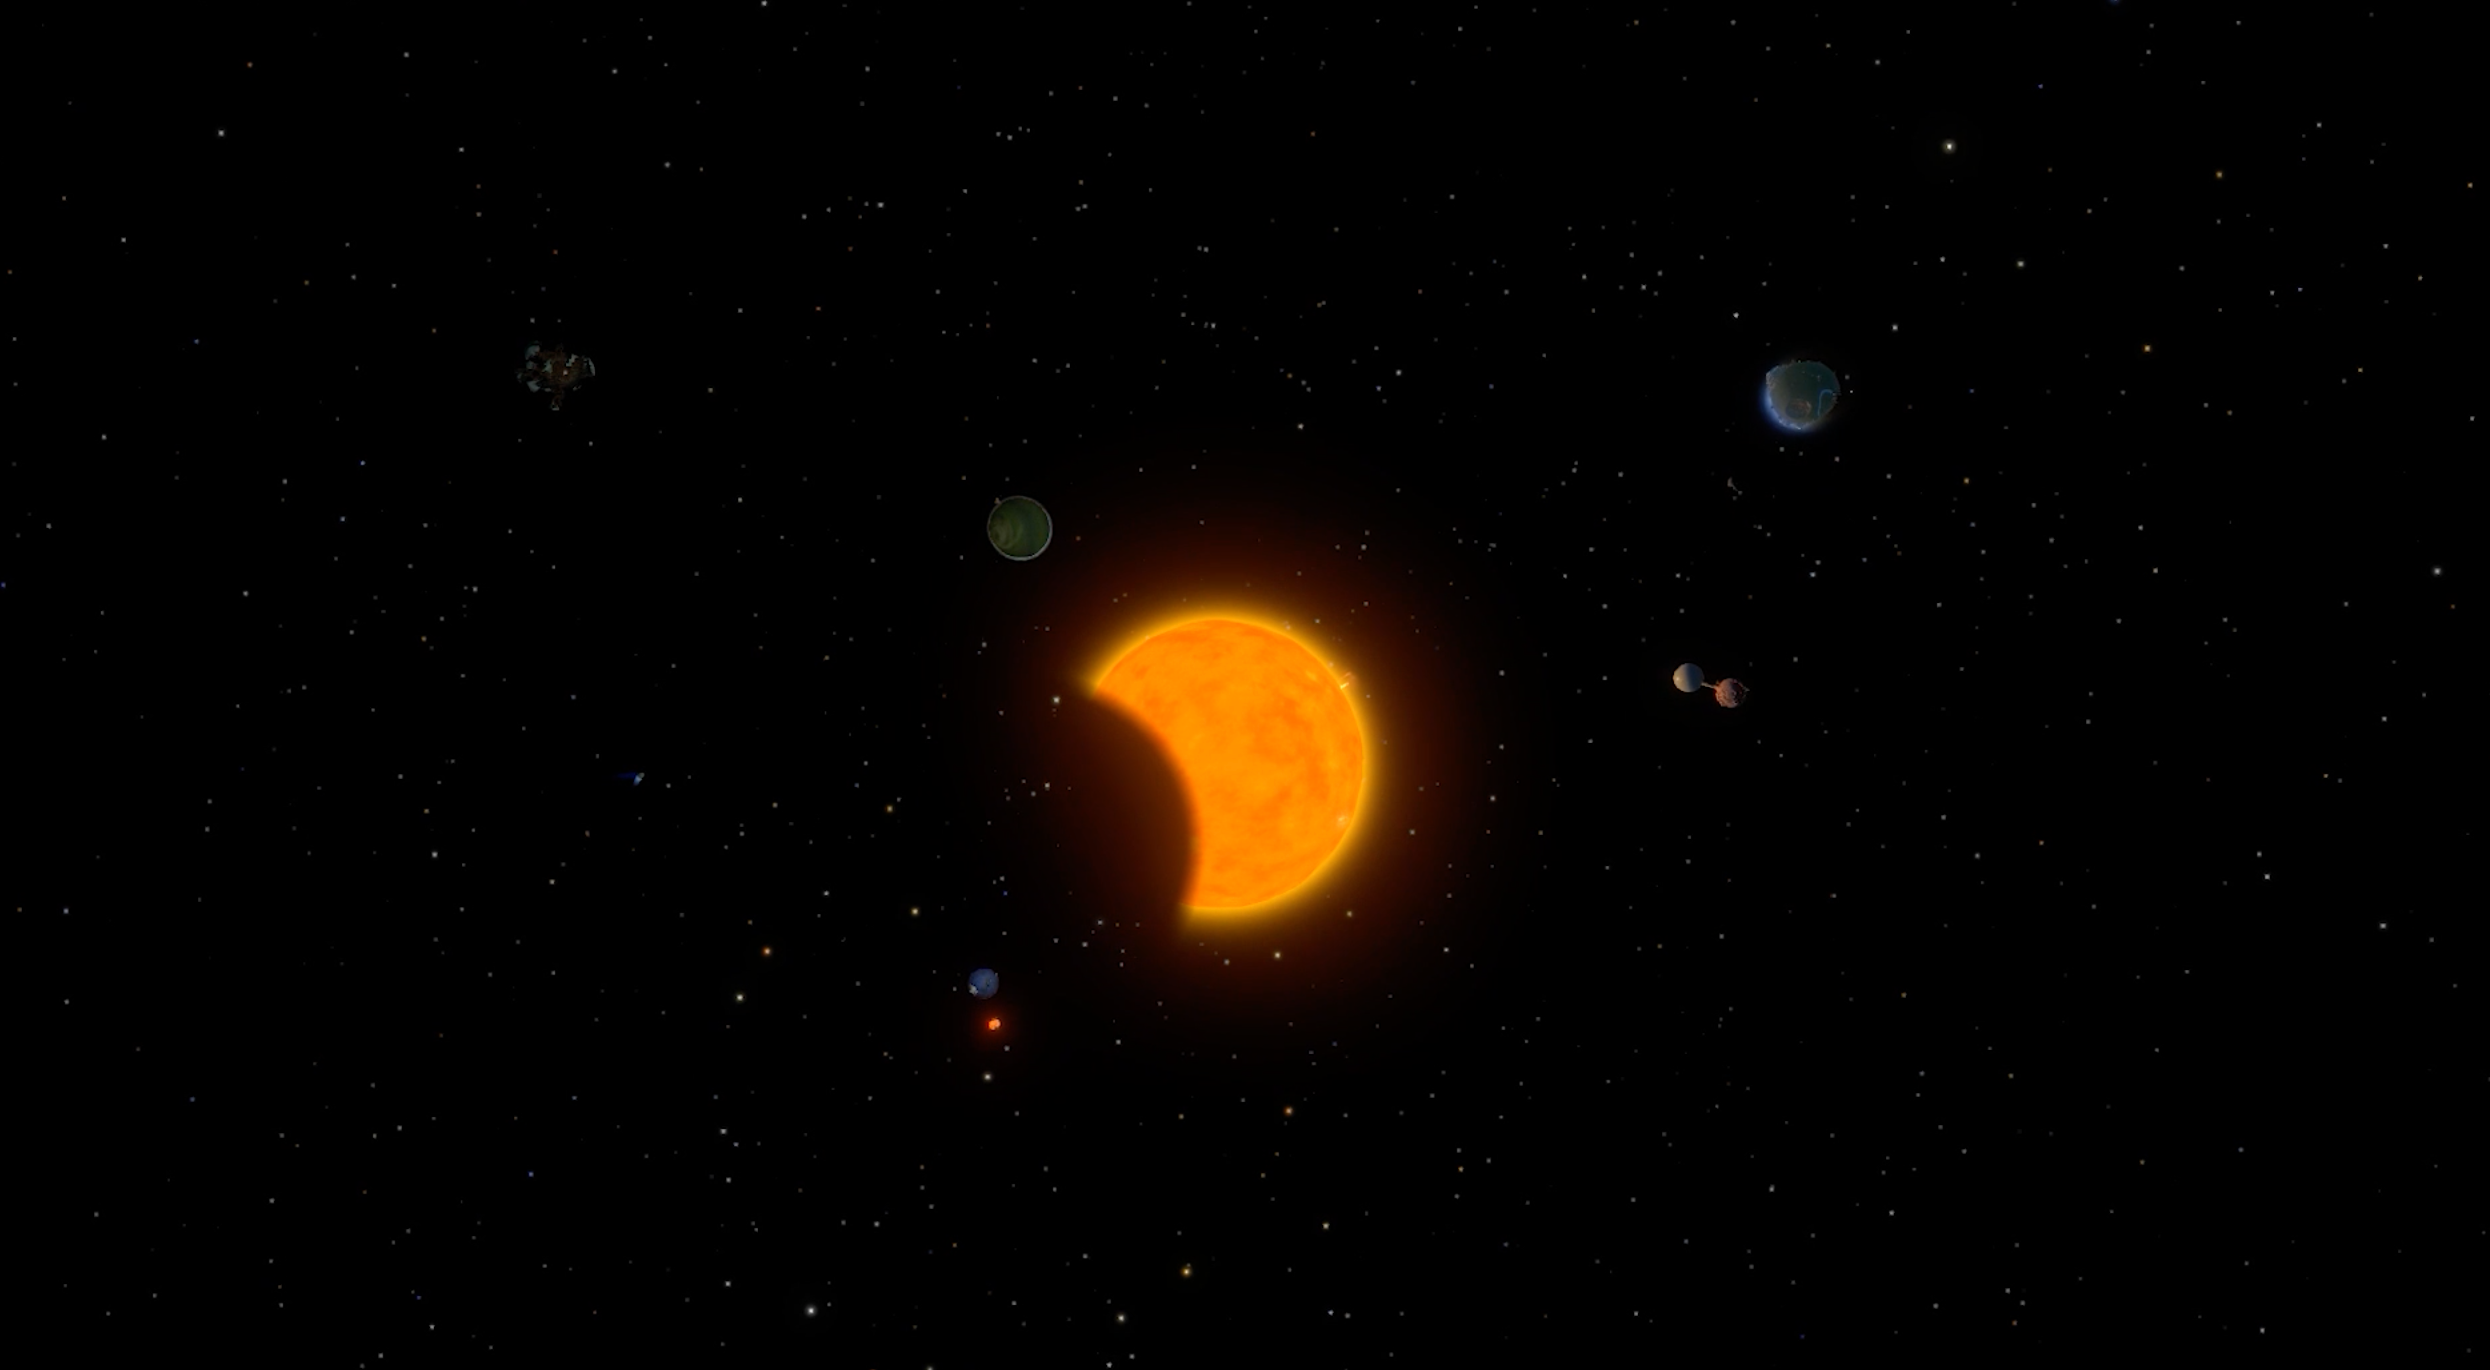 The beginning of an eclipse in Outer Wilds: Echoes Of The Eye